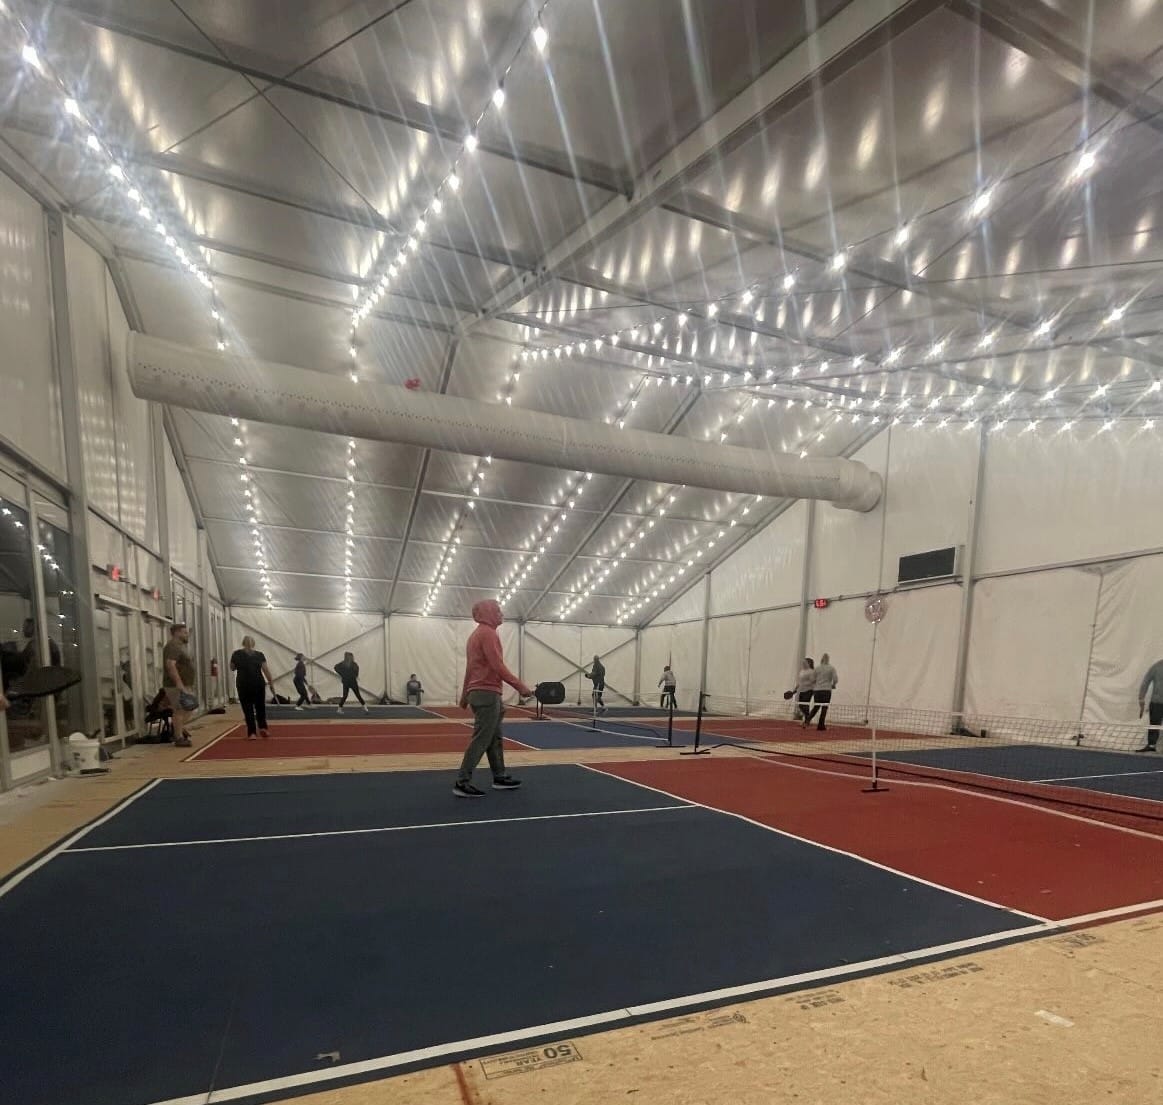 THANK YOU First Horizon Park for an Exciting Winter of Indoor Pickleball!